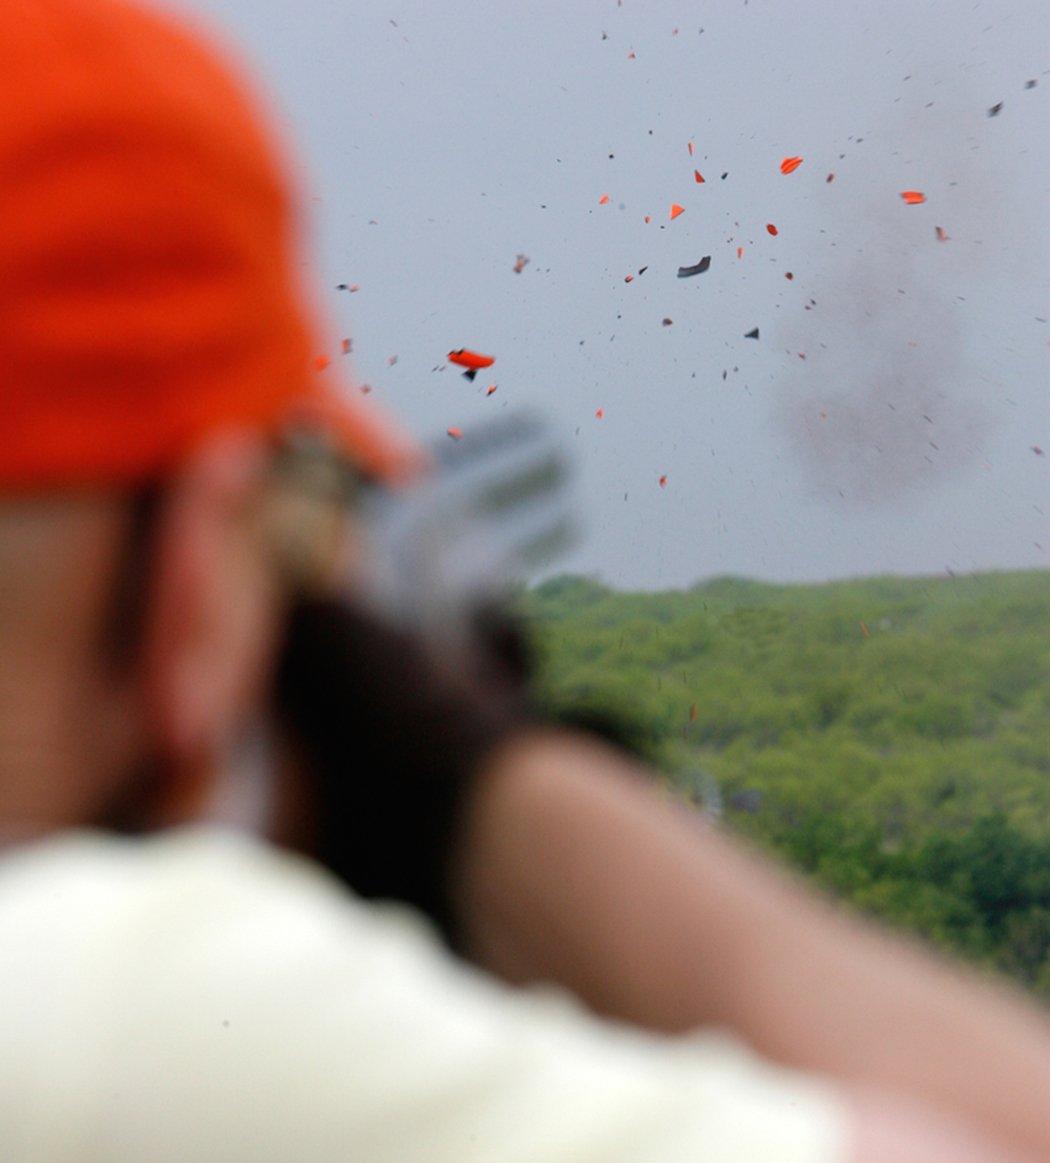 Busting clays isn't hard once you begin to develop the muscle-memory it takes to be successful at it. (Russell Graves photo)